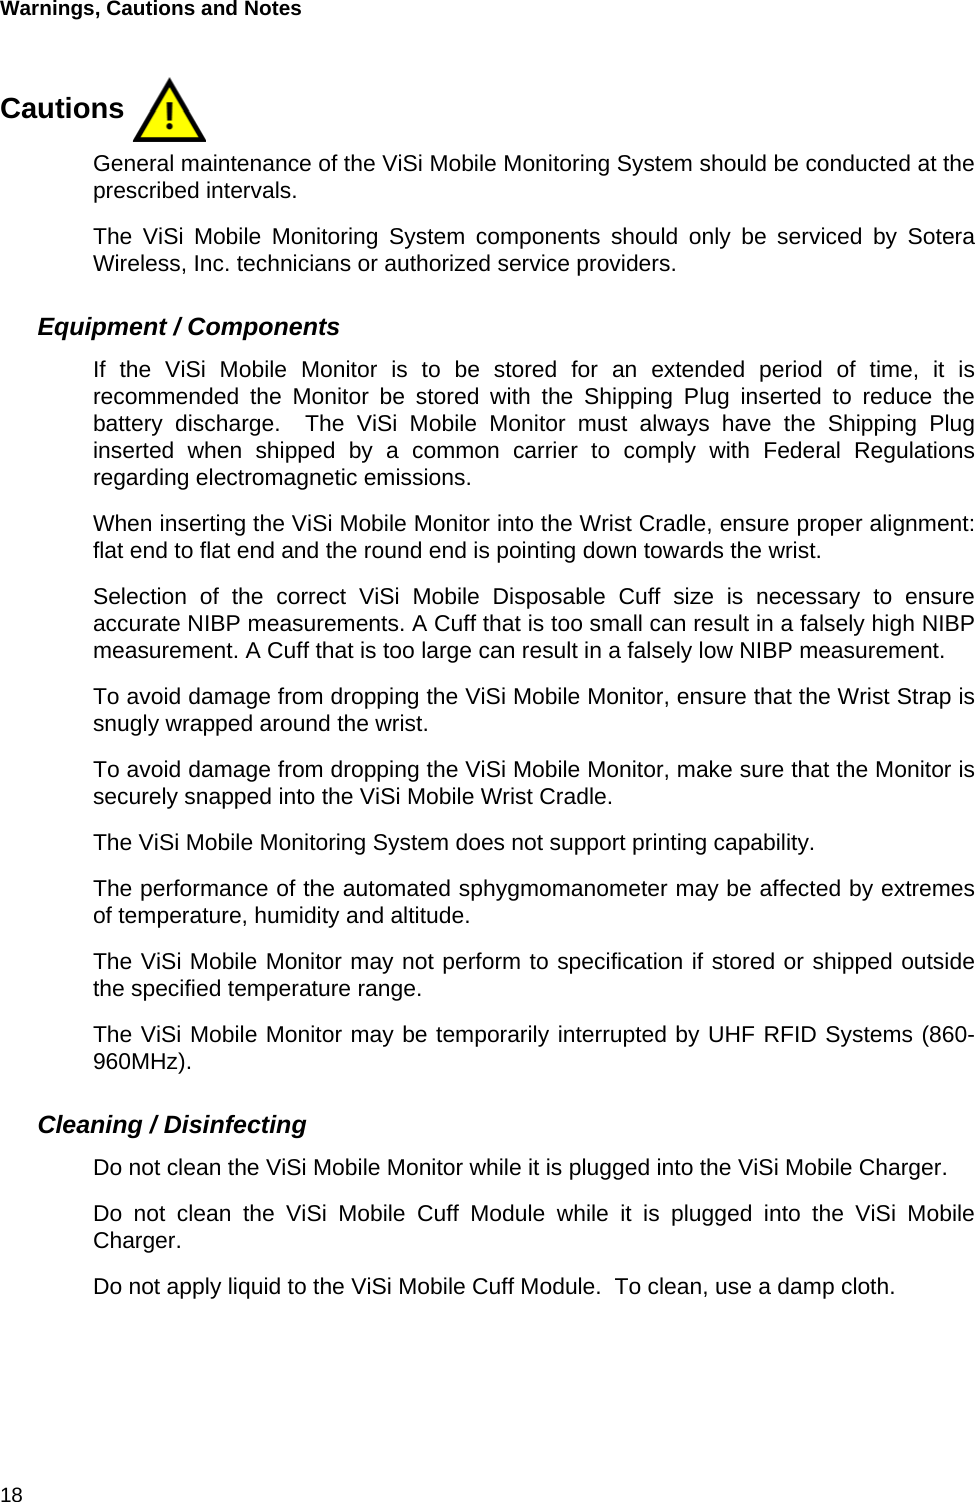 Warnings, Cautions and Notes 18Cautions General maintenance of the ViSi Mobile Monitoring System should be conducted at theprescribed intervals.The ViSi Mobile Monitoring System components should only be serviced by SoteraWireless, Inc. technicians or authorized service providers.Equipment / ComponentsIf the ViSi Mobile Monitor is to be stored for an extended period of time, it isrecommended the Monitor be stored with the Shipping Plug inserted to reduce thebattery discharge.  The ViSi Mobile Monitor must always have the Shipping Pluginserted when shipped by a common carrier to comply with Federal Regulationsregarding electromagnetic emissions.When inserting the ViSi Mobile Monitor into the Wrist Cradle, ensure proper alignment:flat end to flat end and the round end is pointing down towards the wrist.Selection of the correct ViSi Mobile Disposable Cuff size is necessary to ensureaccurate NIBP measurements. A Cuff that is too small can result in a falsely high NIBPmeasurement. A Cuff that is too large can result in a falsely low NIBP measurement.To avoid damage from dropping the ViSi Mobile Monitor, ensure that the Wrist Strap issnugly wrapped around the wrist.To avoid damage from dropping the ViSi Mobile Monitor, make sure that the Monitor issecurely snapped into the ViSi Mobile Wrist Cradle.The ViSi Mobile Monitoring System does not support printing capability.The performance of the automated sphygmomanometer may be affected by extremesof temperature, humidity and altitude.The ViSi Mobile Monitor may not perform to specification if stored or shipped outsidethe specified temperature range.The ViSi Mobile Monitor may be temporarily interrupted by UHF RFID Systems (860-960MHz).Cleaning / DisinfectingDo not clean the ViSi Mobile Monitor while it is plugged into the ViSi Mobile Charger.Do not clean the ViSi Mobile Cuff Module while it is plugged into the ViSi MobileCharger.Do not apply liquid to the ViSi Mobile Cuff Module.  To clean, use a damp cloth.